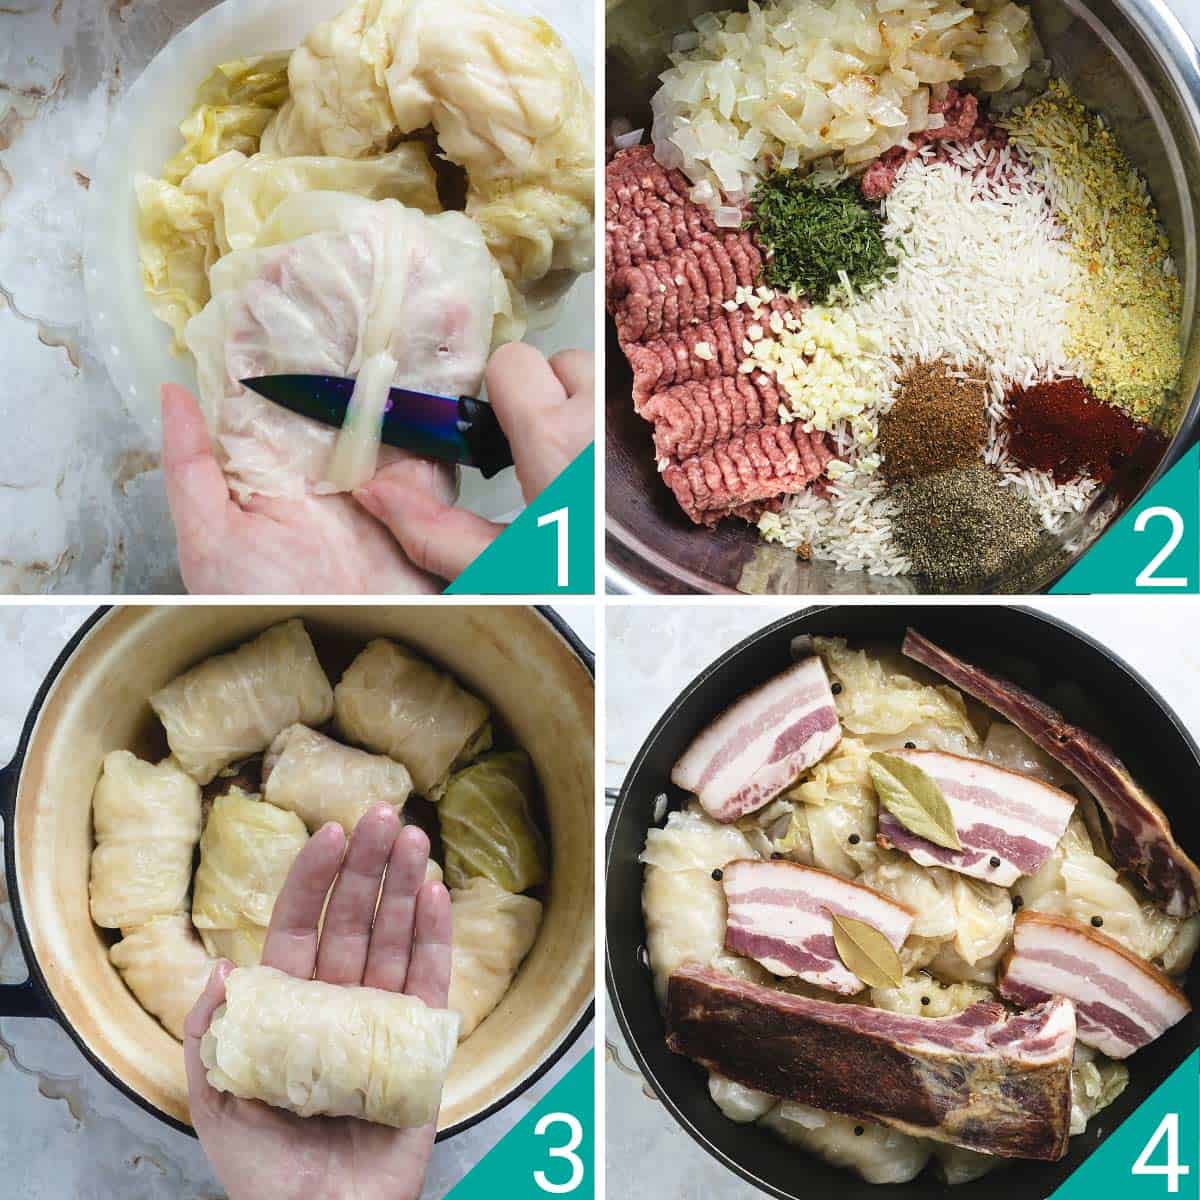 Four-step photo of prepping the leaves, making the meat stuffing, making rolls, and covering them with smoked meat.